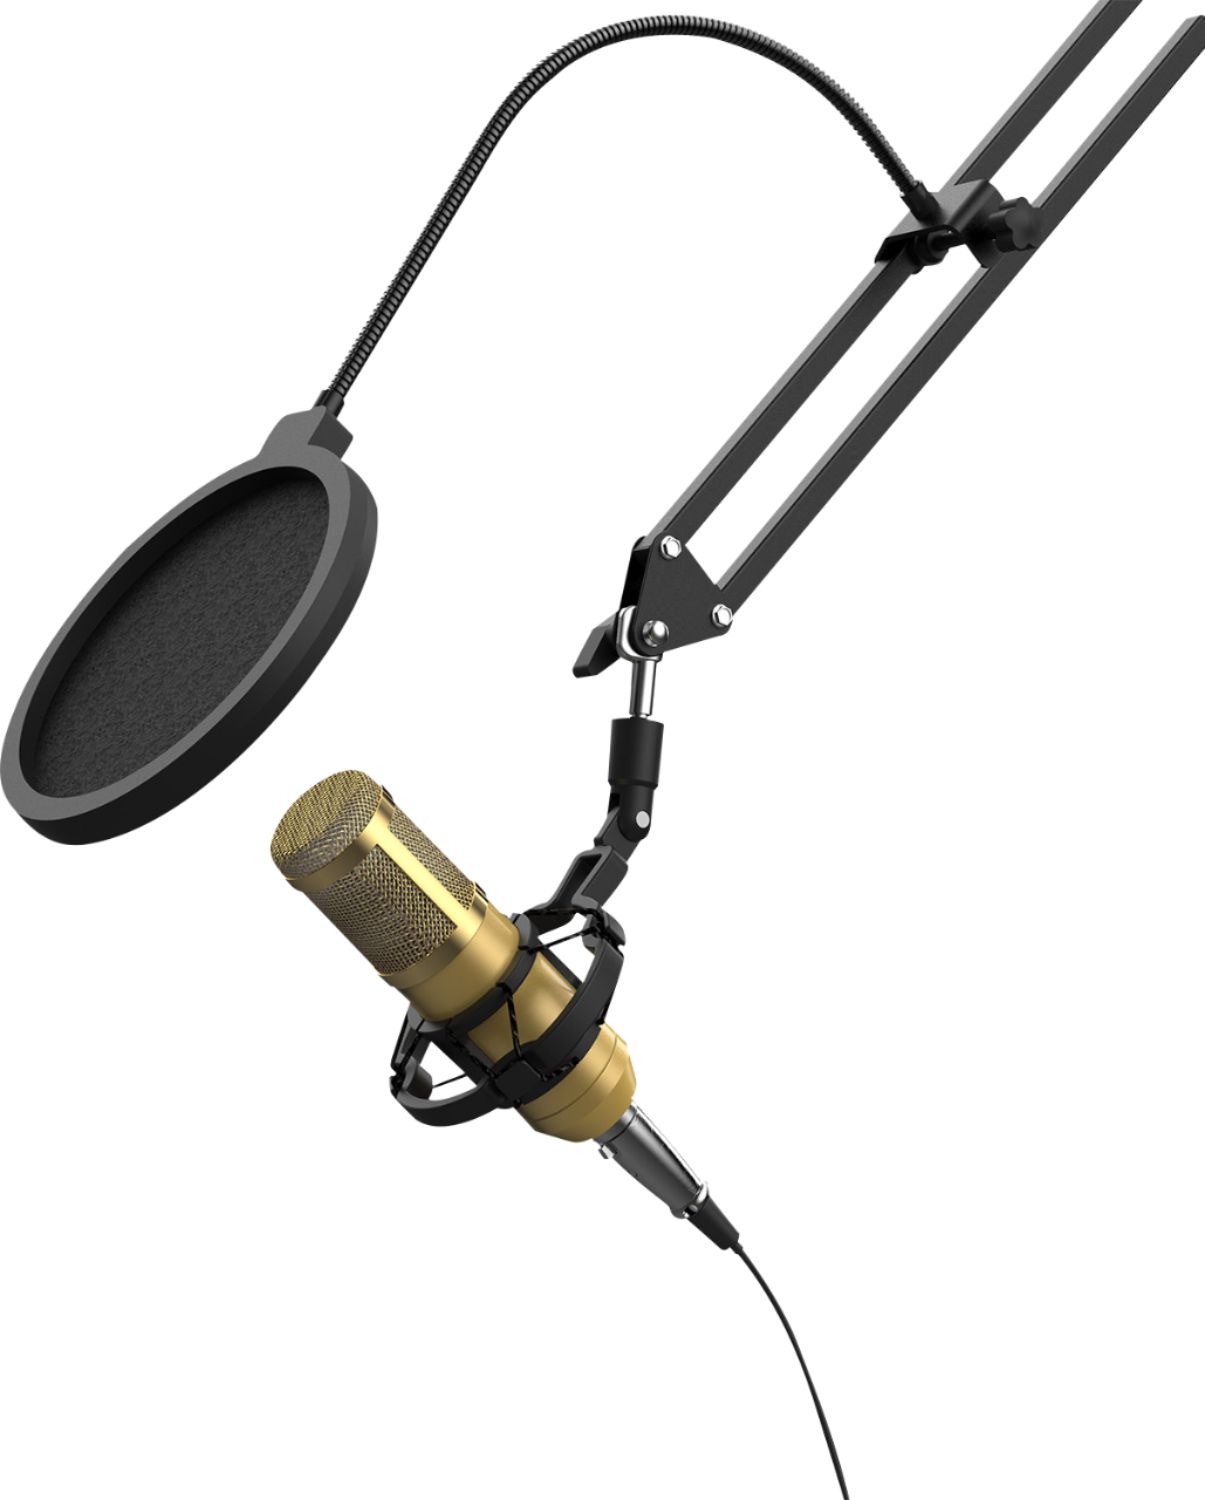 Angle View: Philips - LFH9173 Clip-on microphone